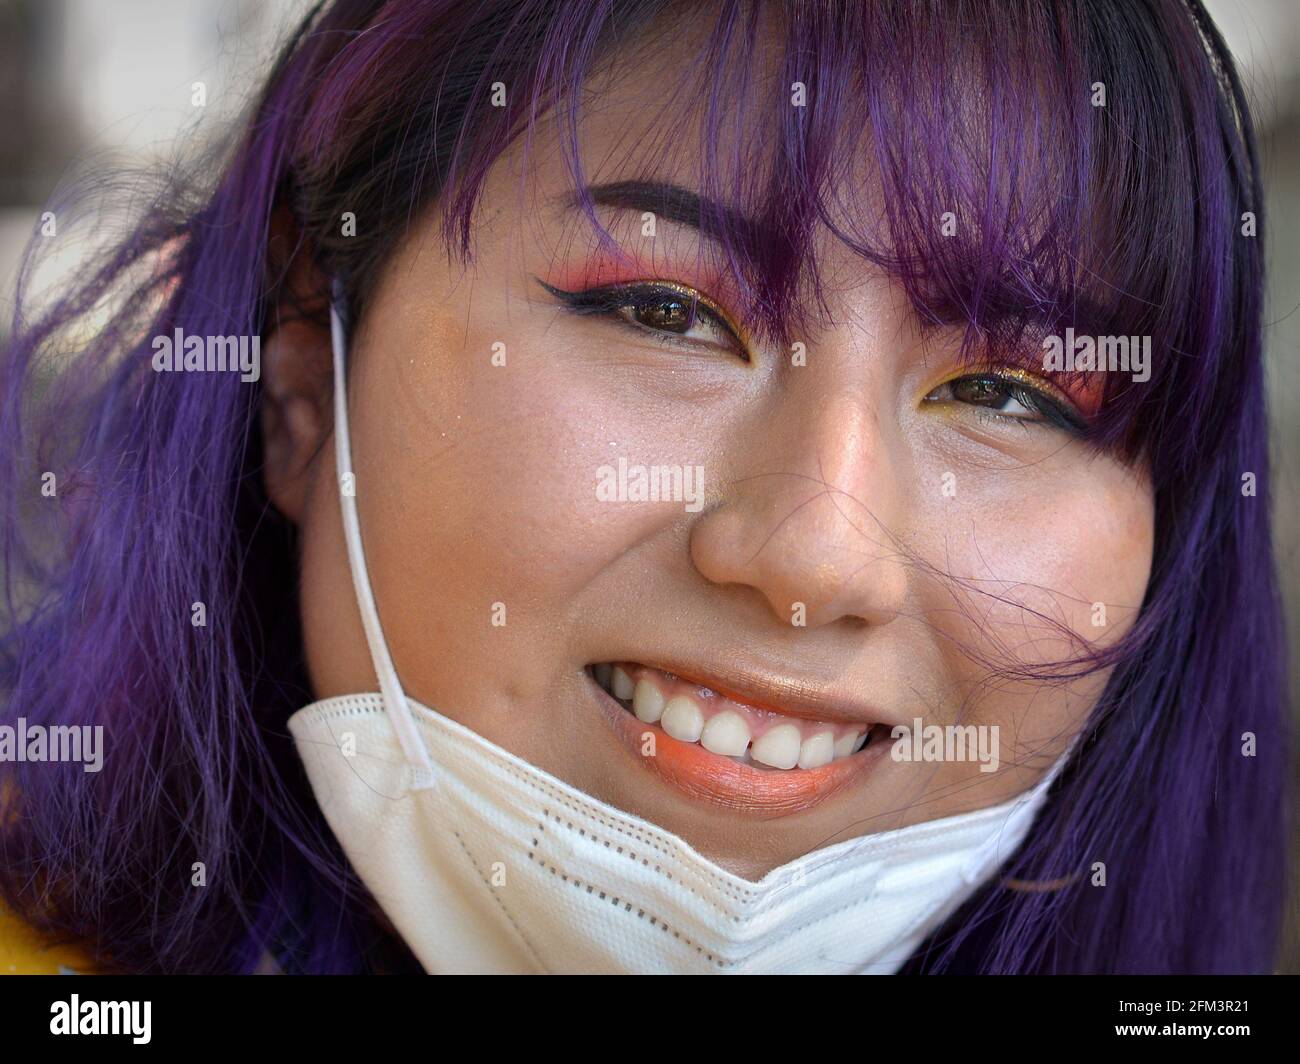 Young happy indigenous South American woman with elaborate eye makeup and blue dyed hair pulls down her KN95 face mask and smiles for the camera. Stock Photo